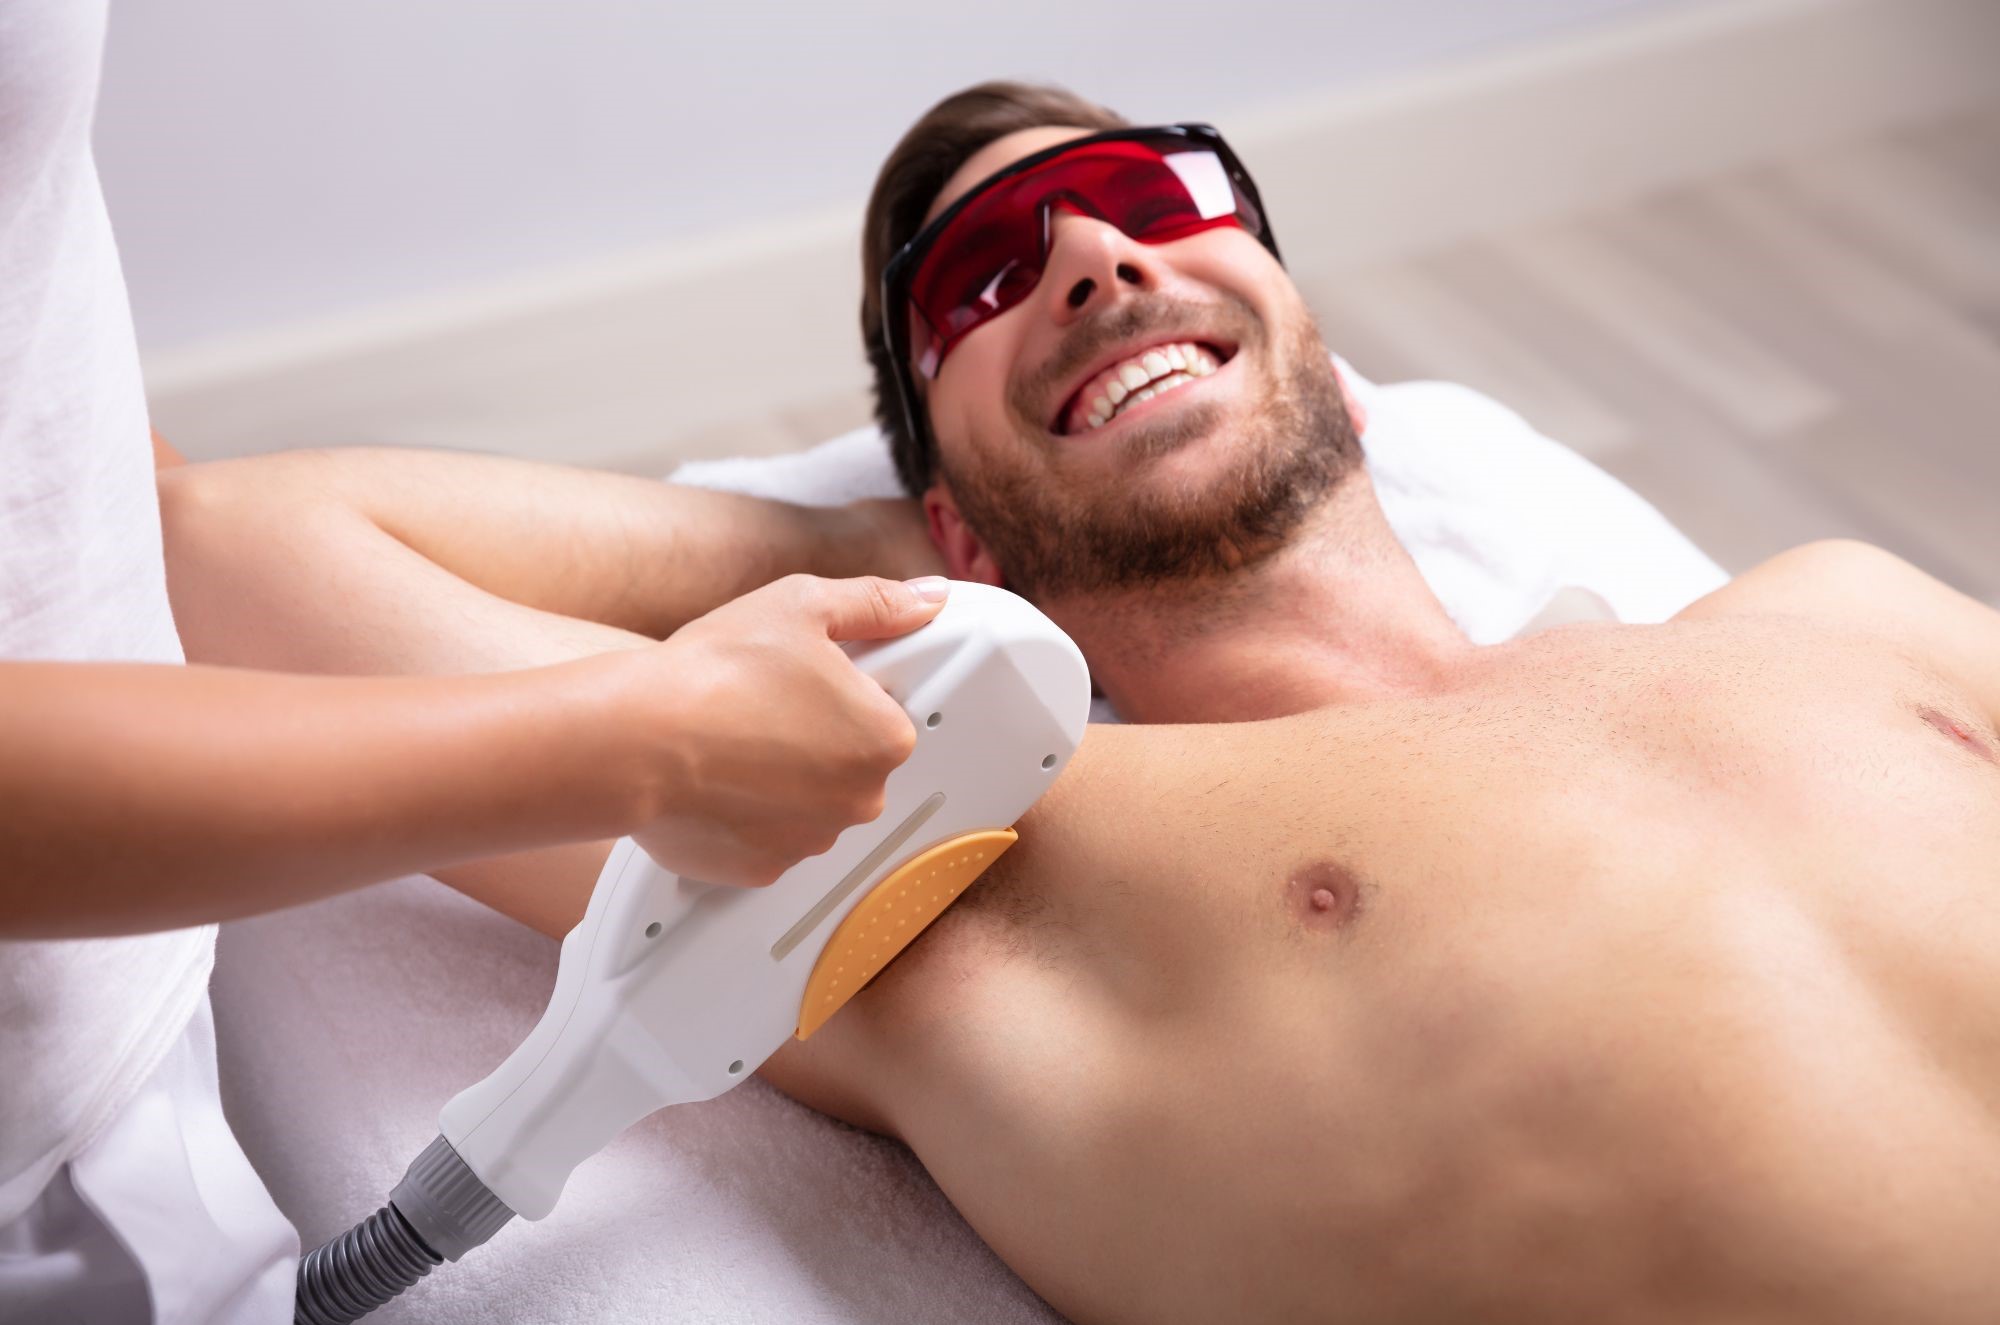 Most people describe laser hair removal as a pretty painless procedure.